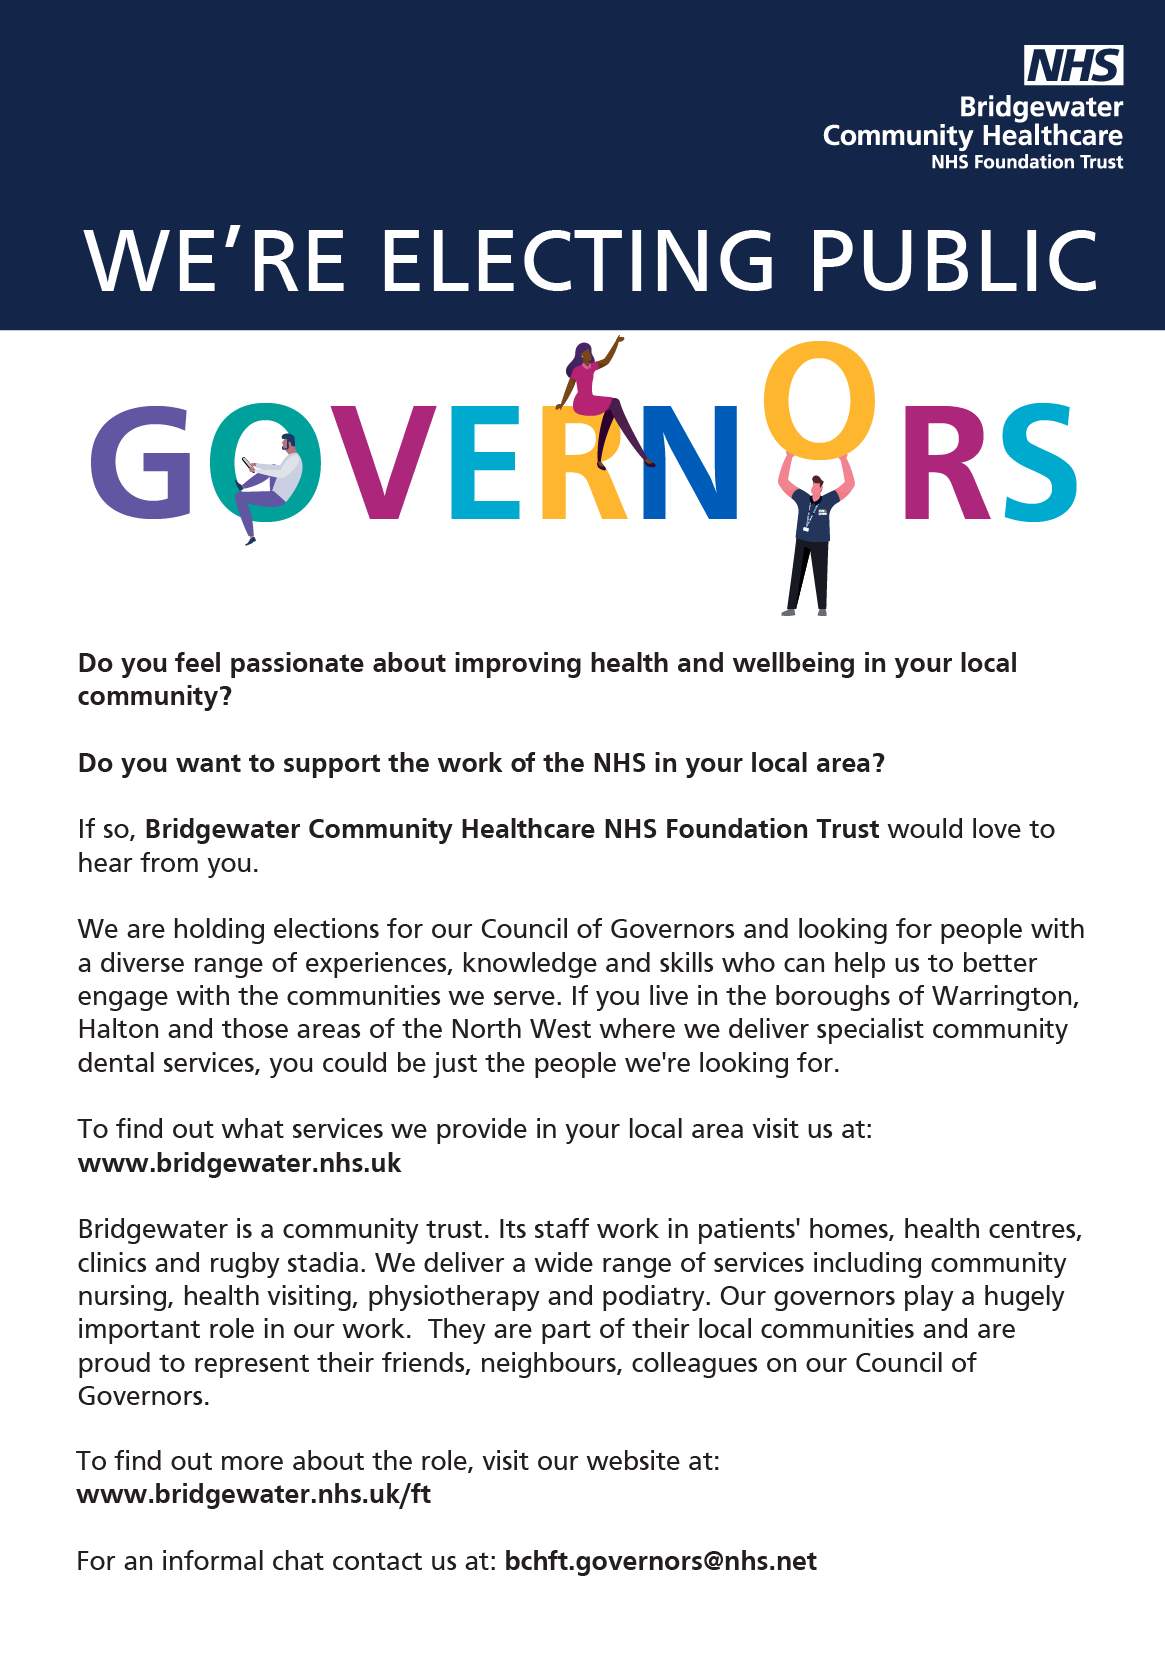 Bridgewater Community Healthcare NHS Foundation Trust are electing Governers